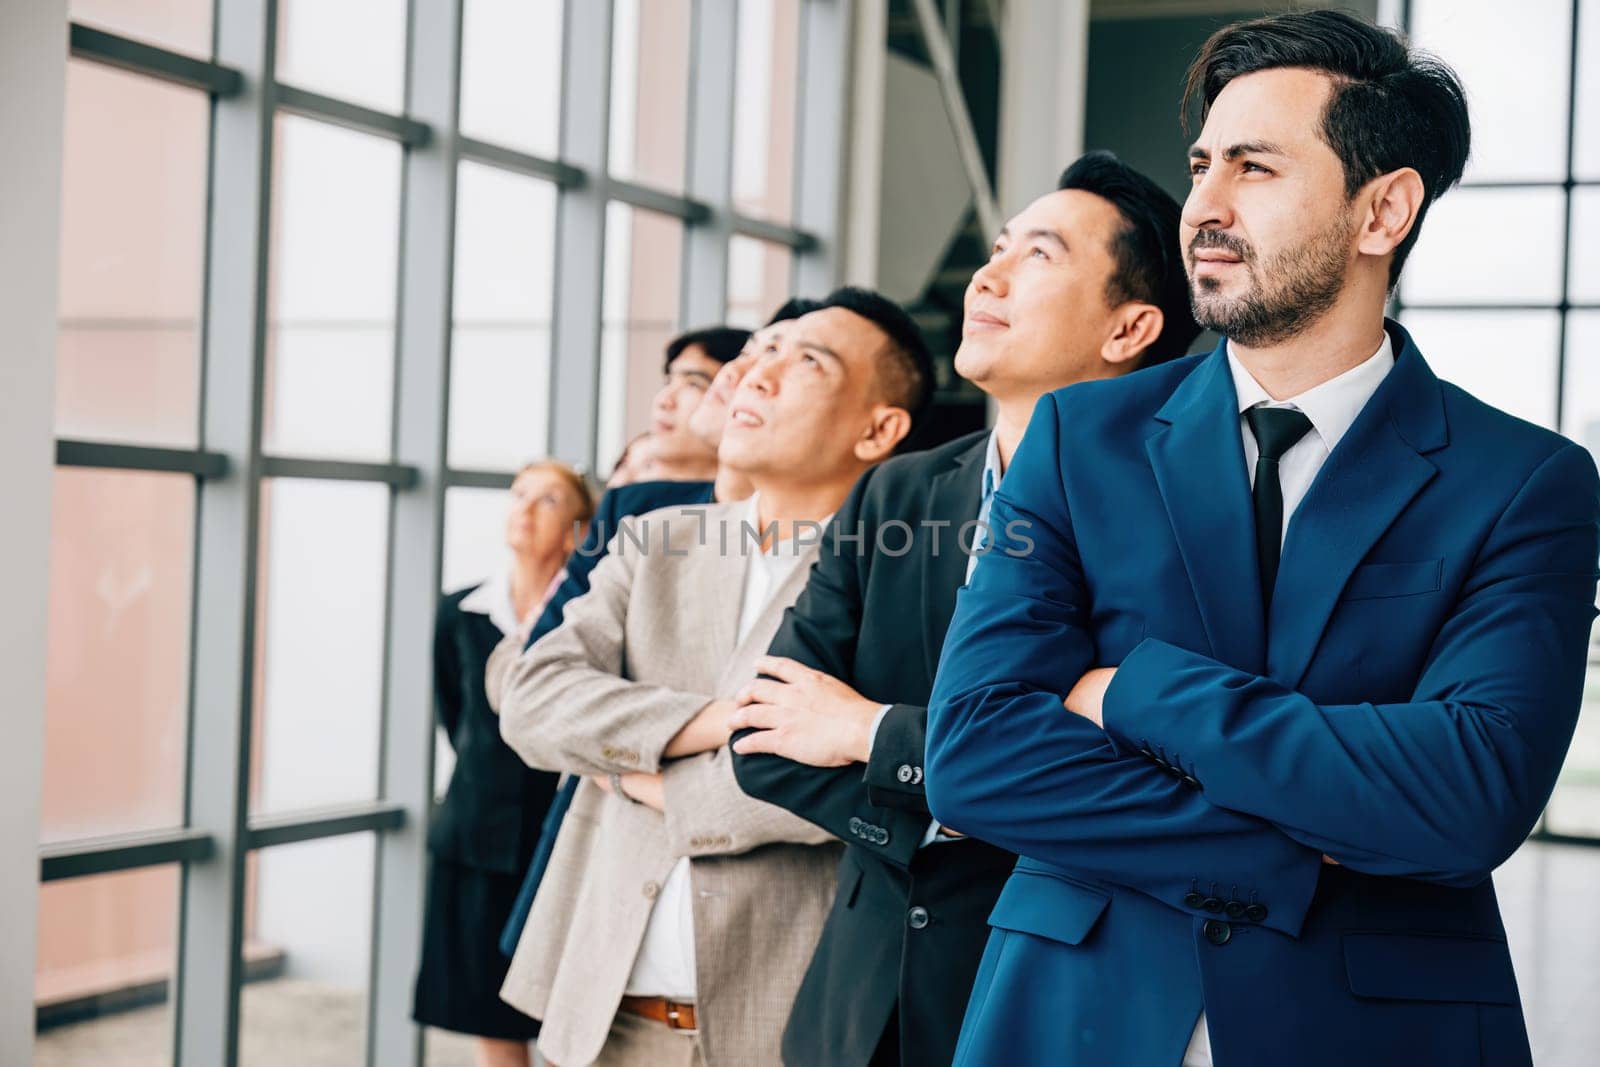 Confidence and success define group portrait of young businesspeople and businessman in office standing with crossed arms. They exemplify strong leadership, teamwork and spirit of a thriving startup.